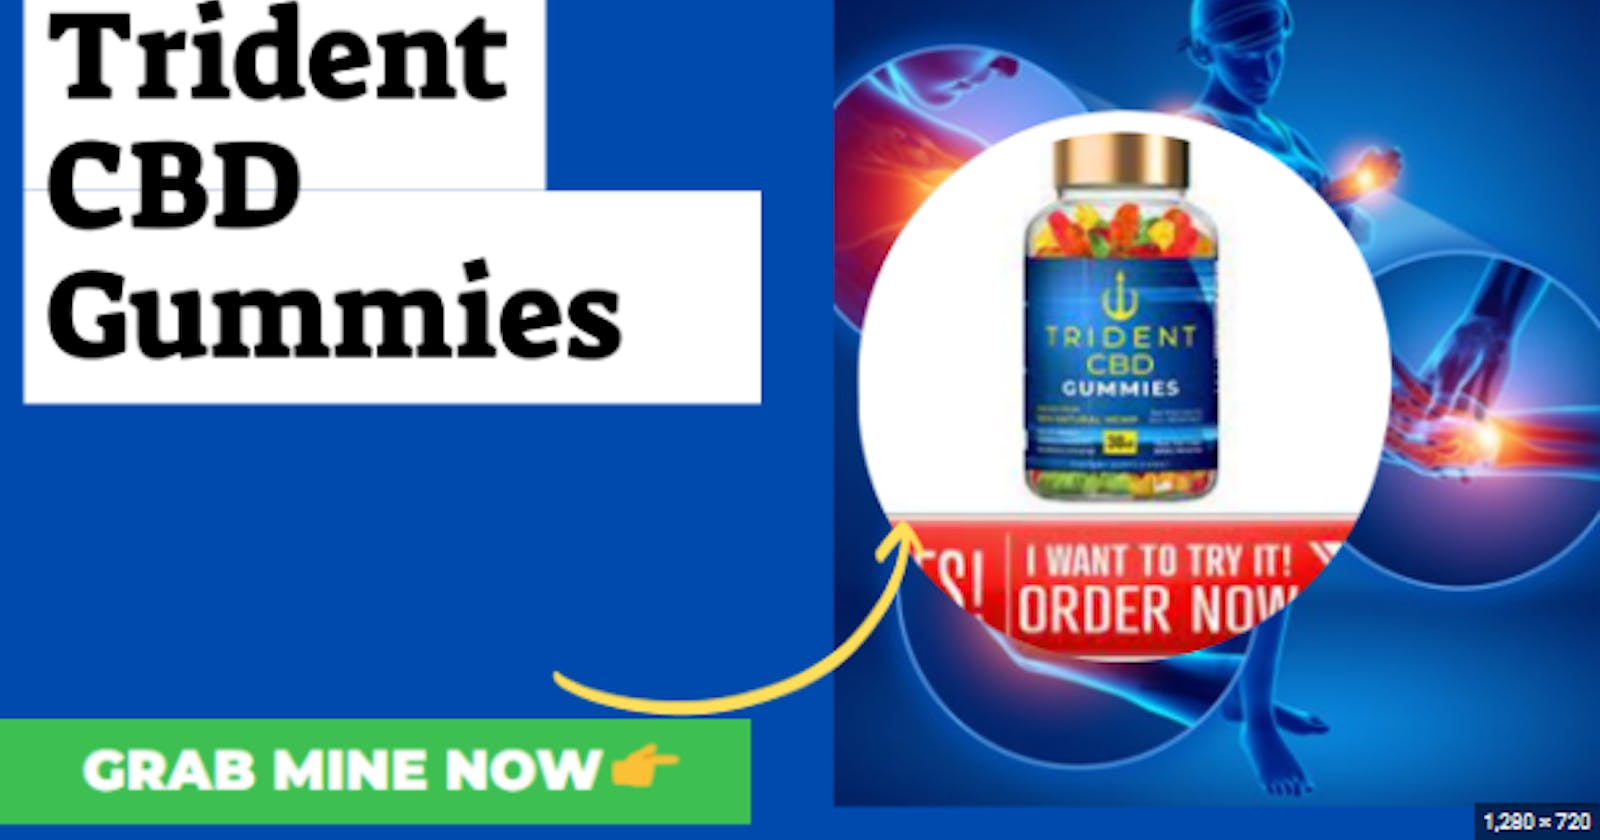 Trident CBD Gummies Reviews [Scam Revealed] Trending CBD Gummies Must Check Before Buying, 2023  Pros-Cons Updated?